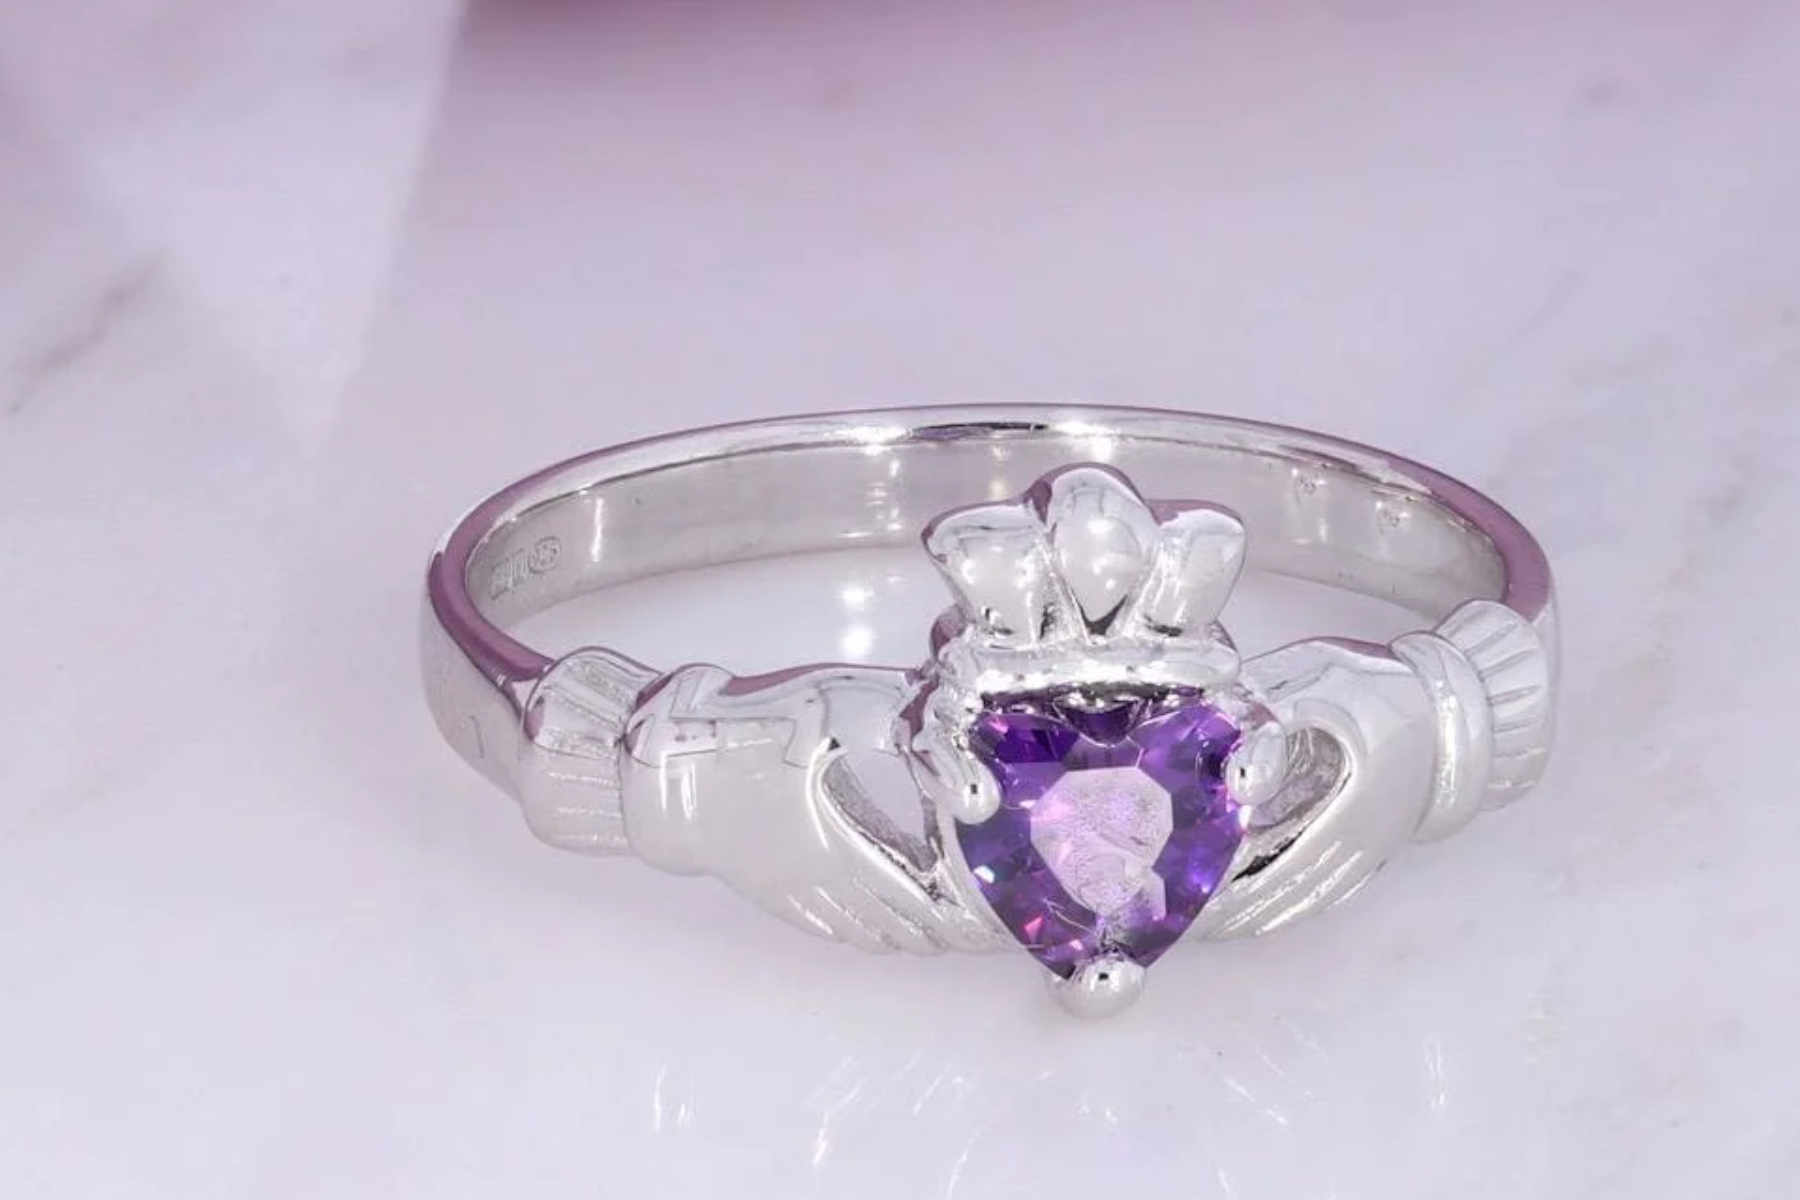 Claddagh ring with amethyst in the center